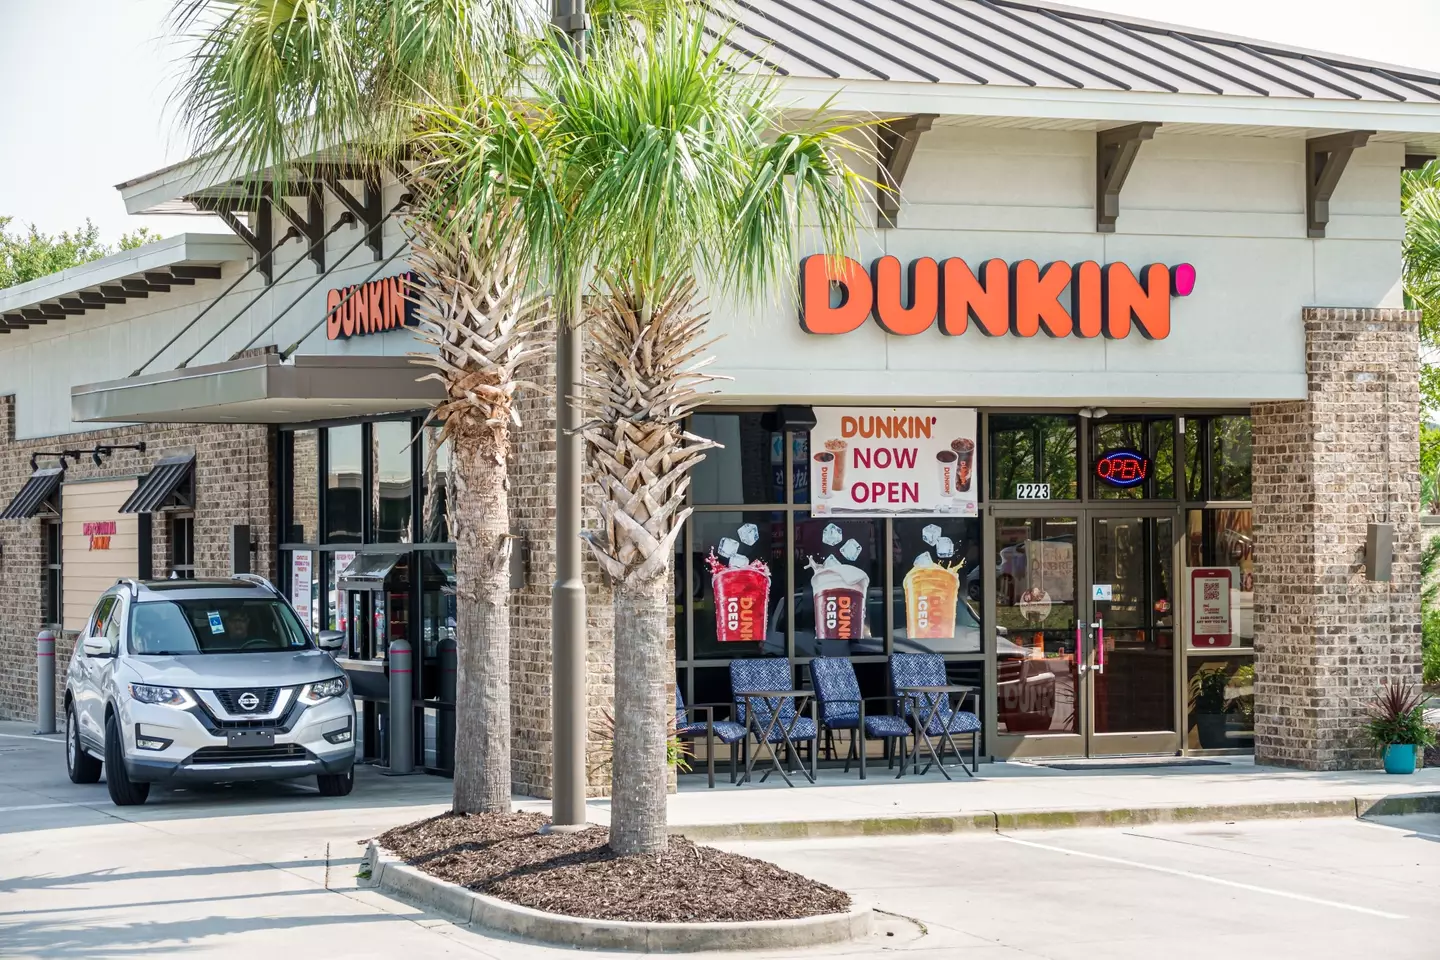 Keosha called out the bad habits after working at Dunkin'. (Jeffrey Greenberg/Universal Images Group via Getty Images)